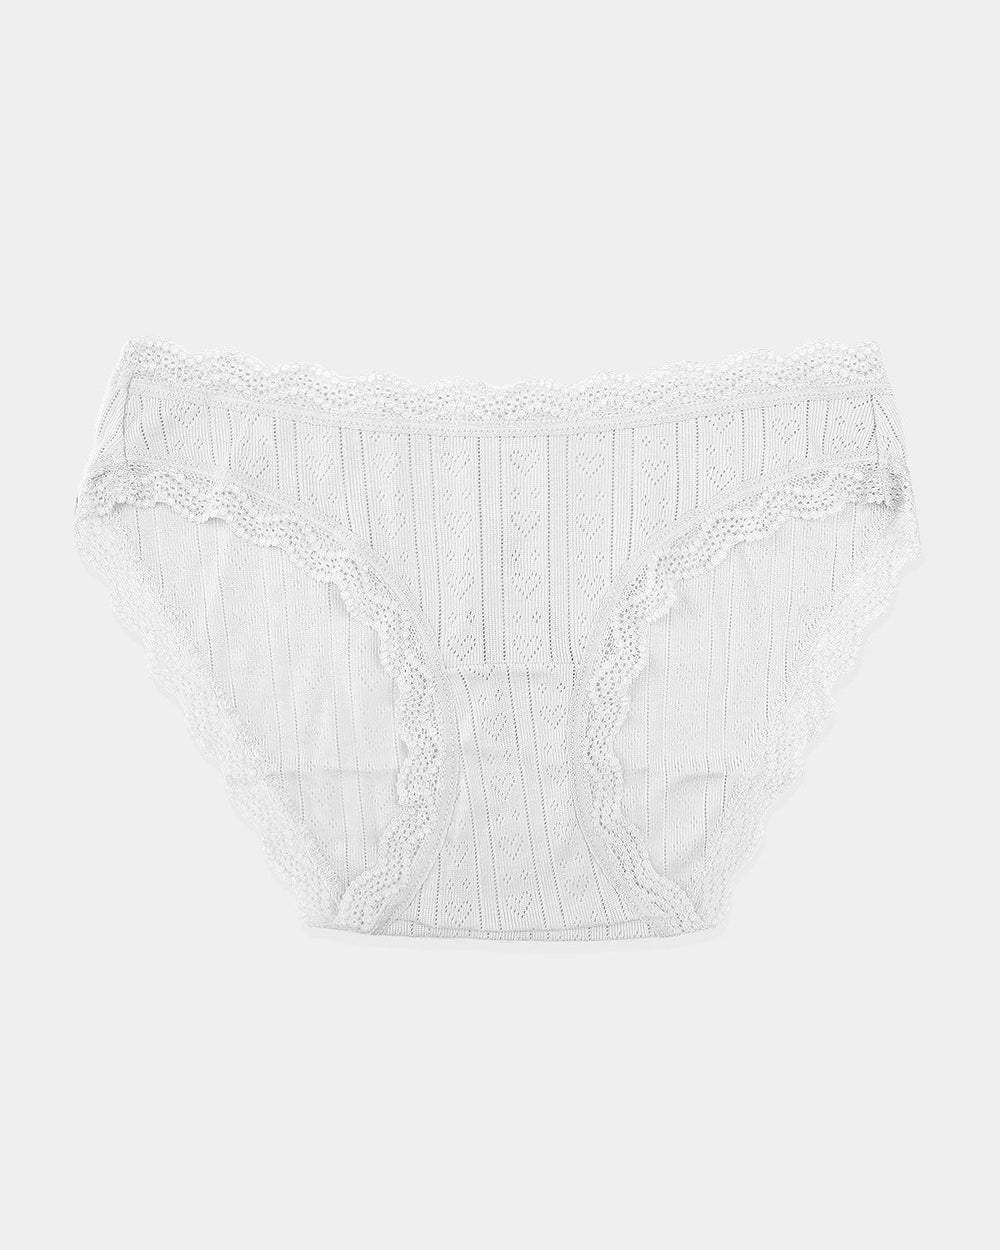 Vintage Pair of High Waist PANTIE / White Pointelle Cotton Knit Knickers /  Women Lingerie New Vintage -  Canada